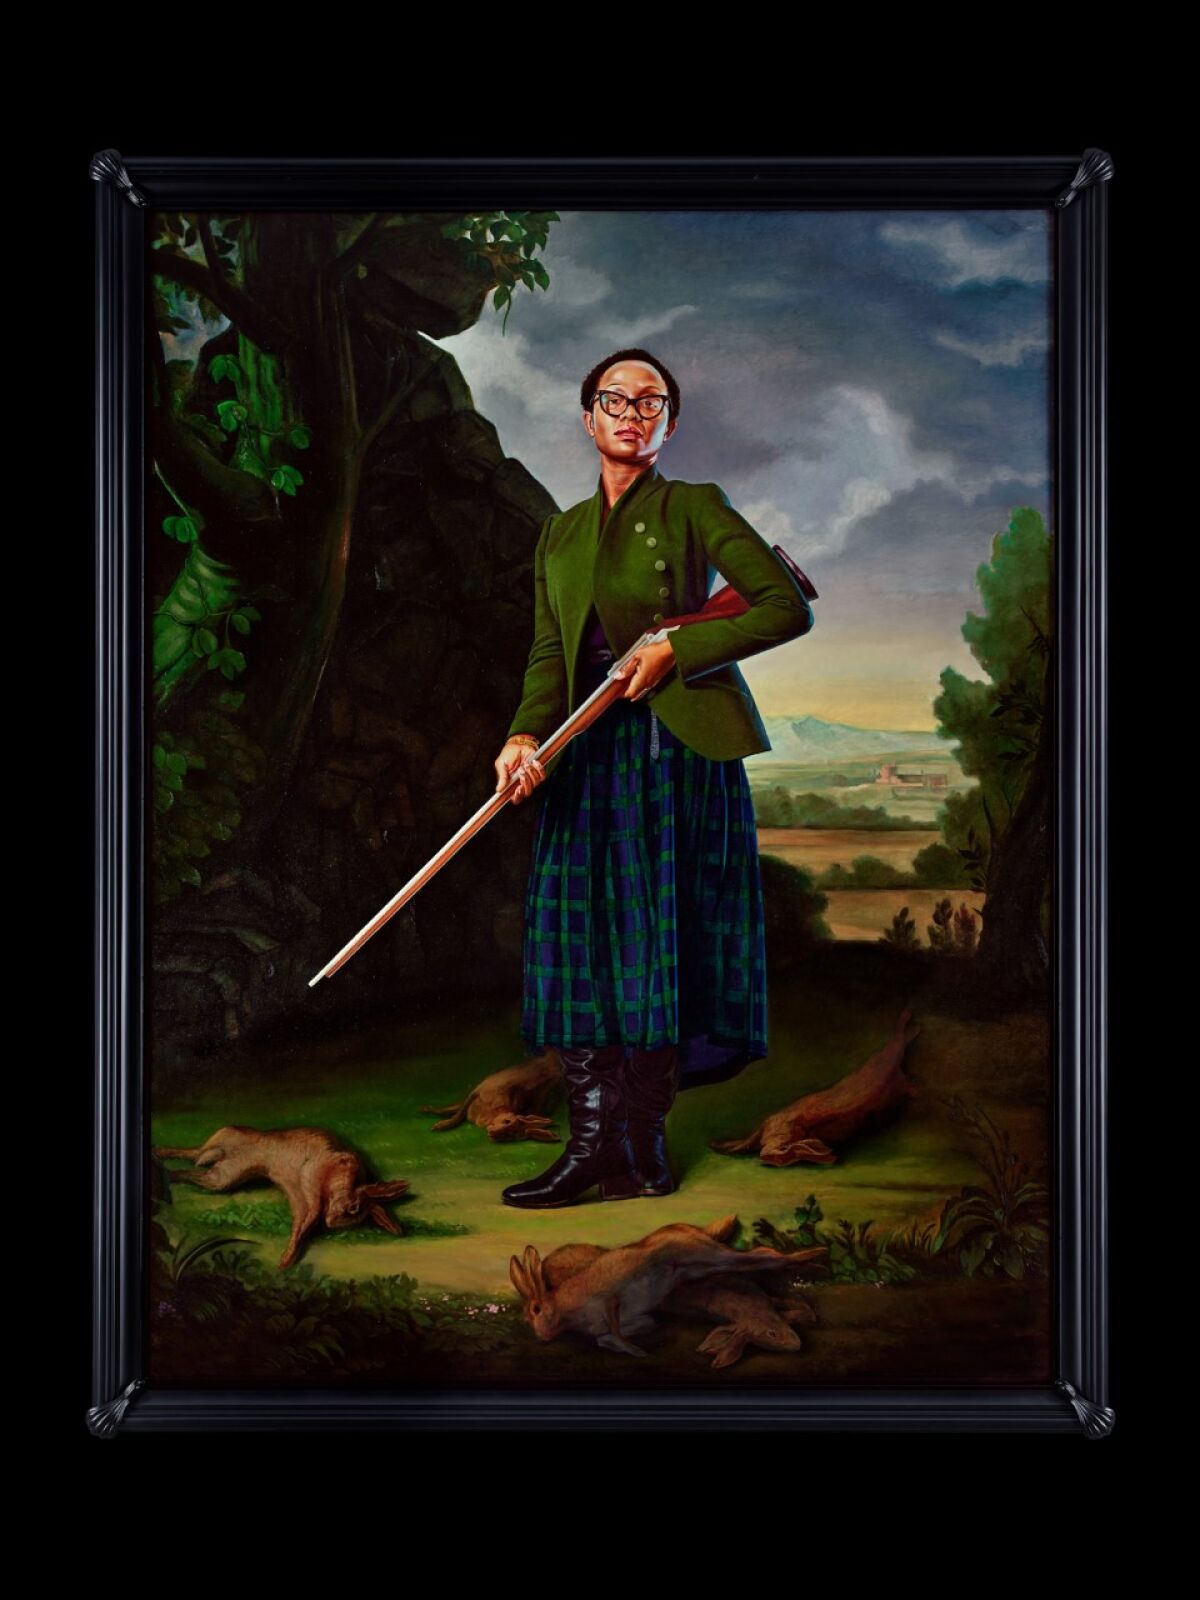 Kehinde Wiley's "Portrait of Lynette Yiadom-Boakye, Jacob Morland of Capplethwaite" shows a Black woman dressed for hunting.